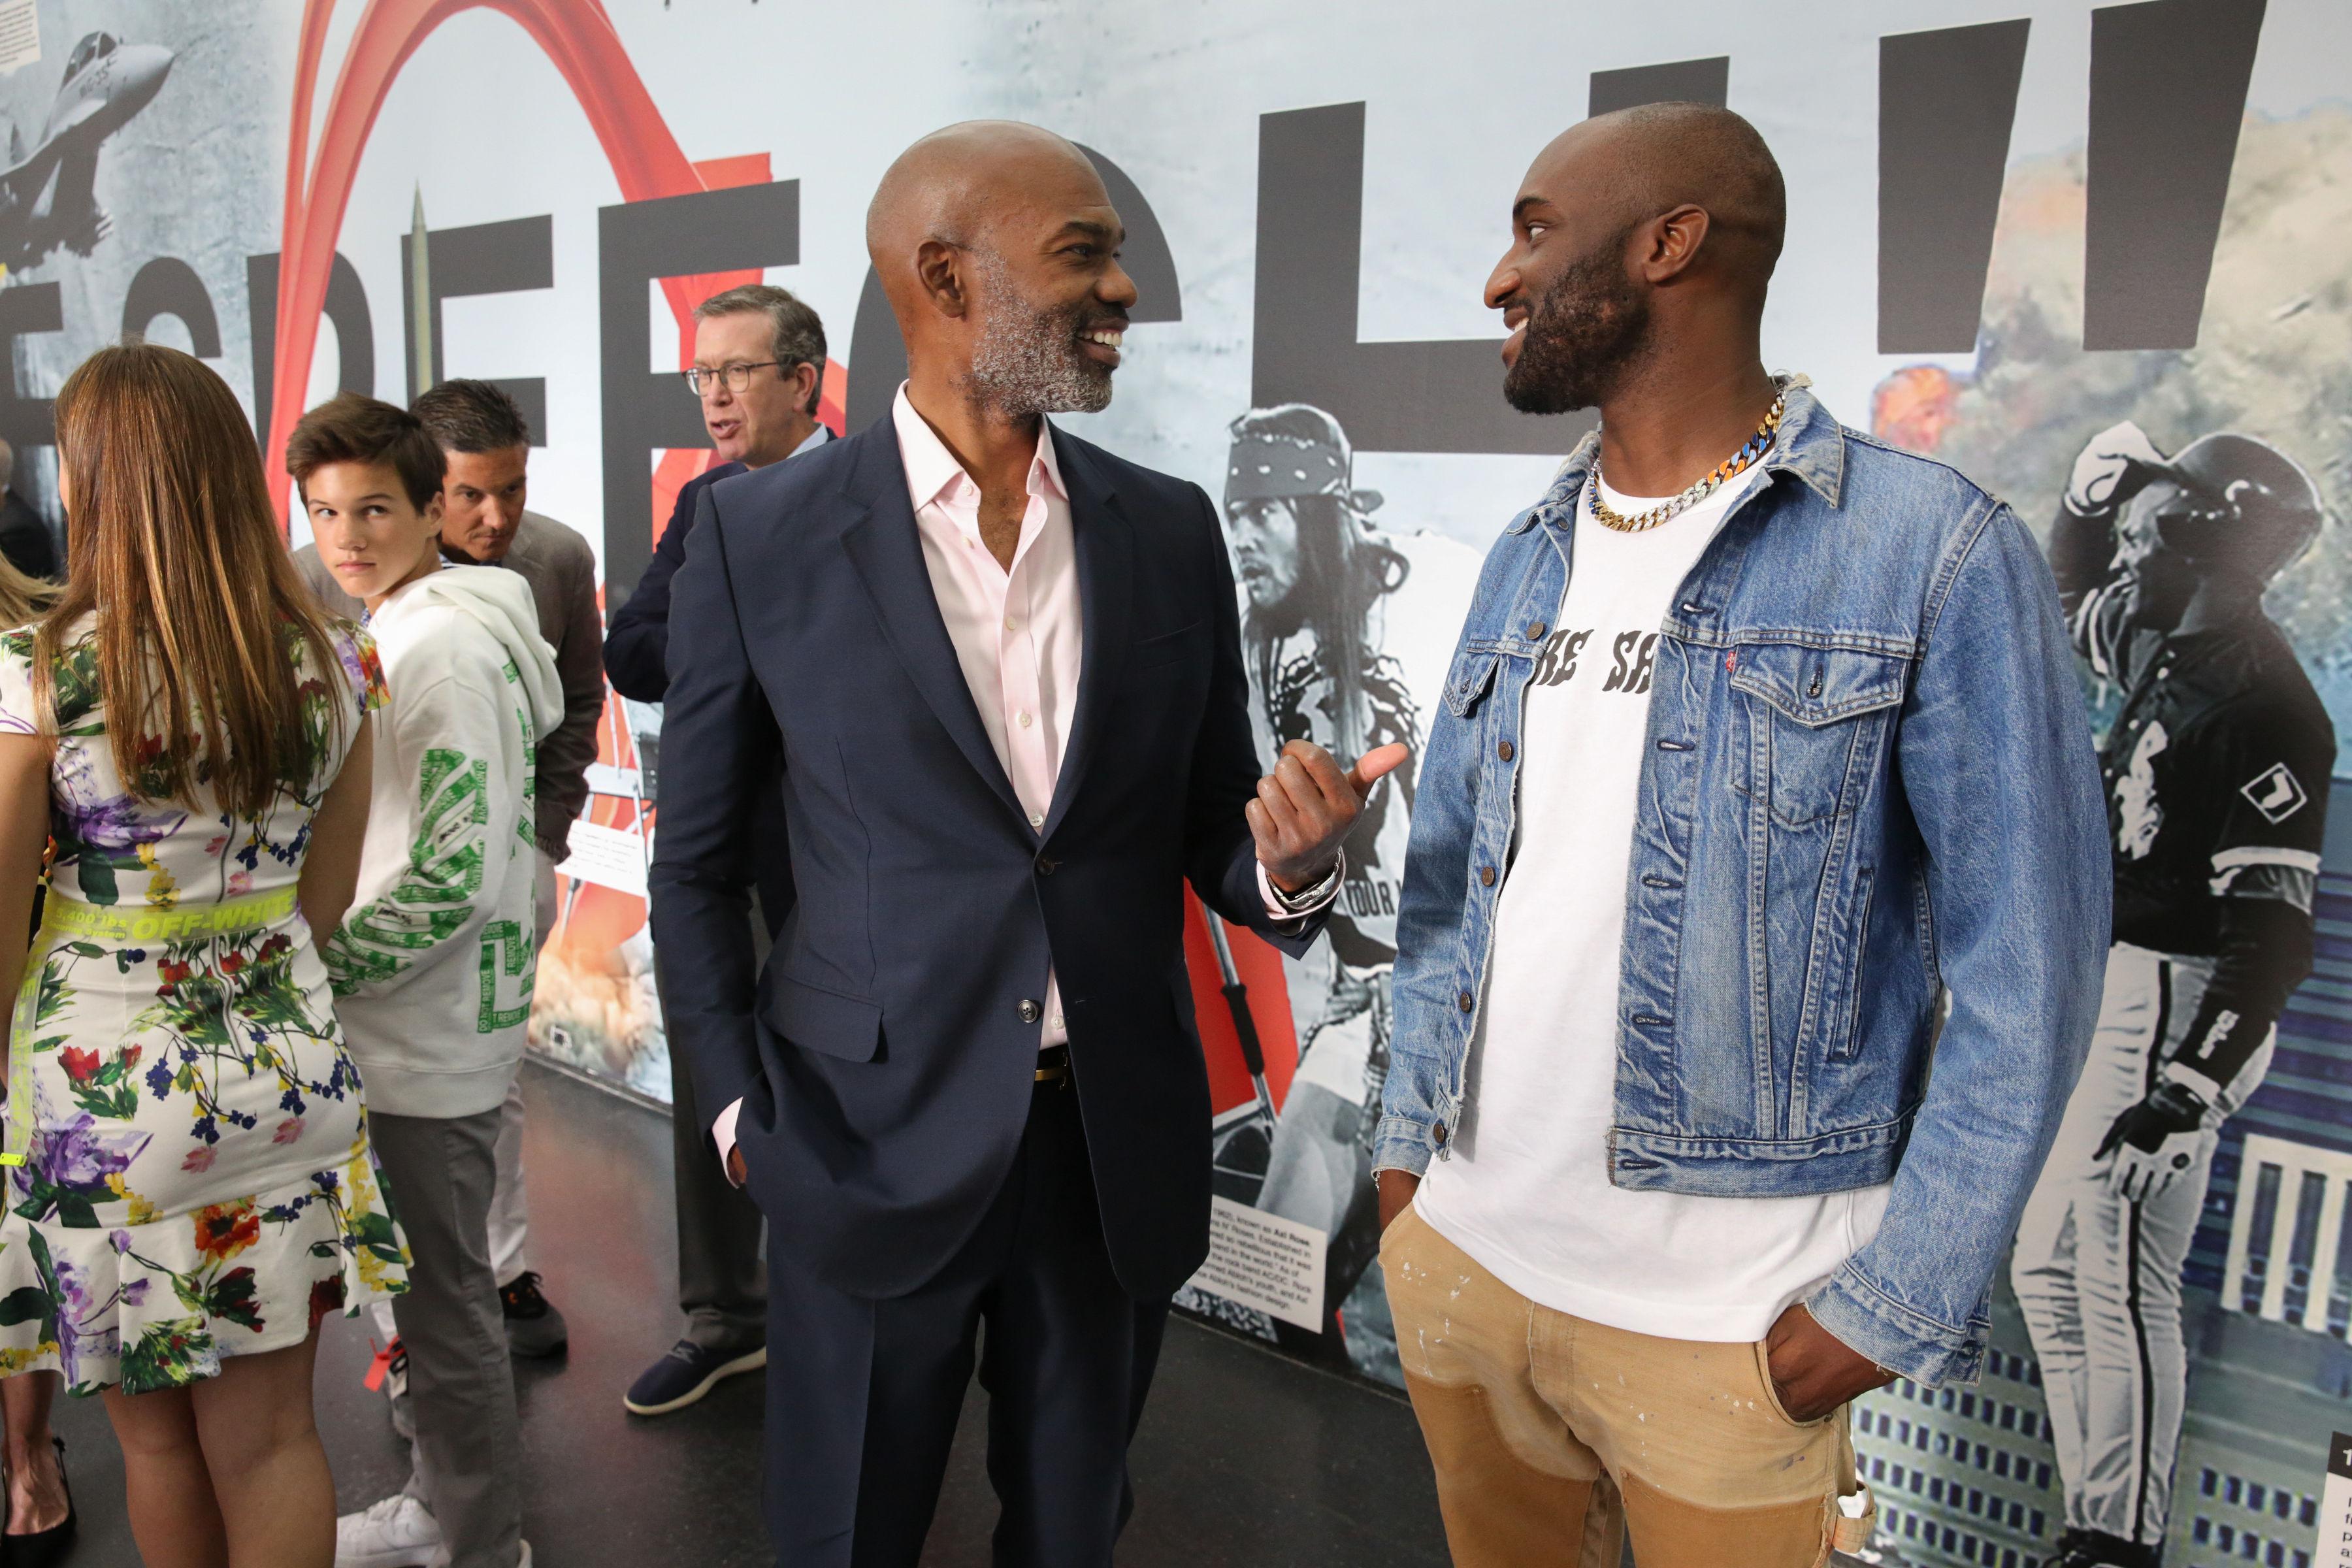 Virgil Abloh in conversation during an MCA event